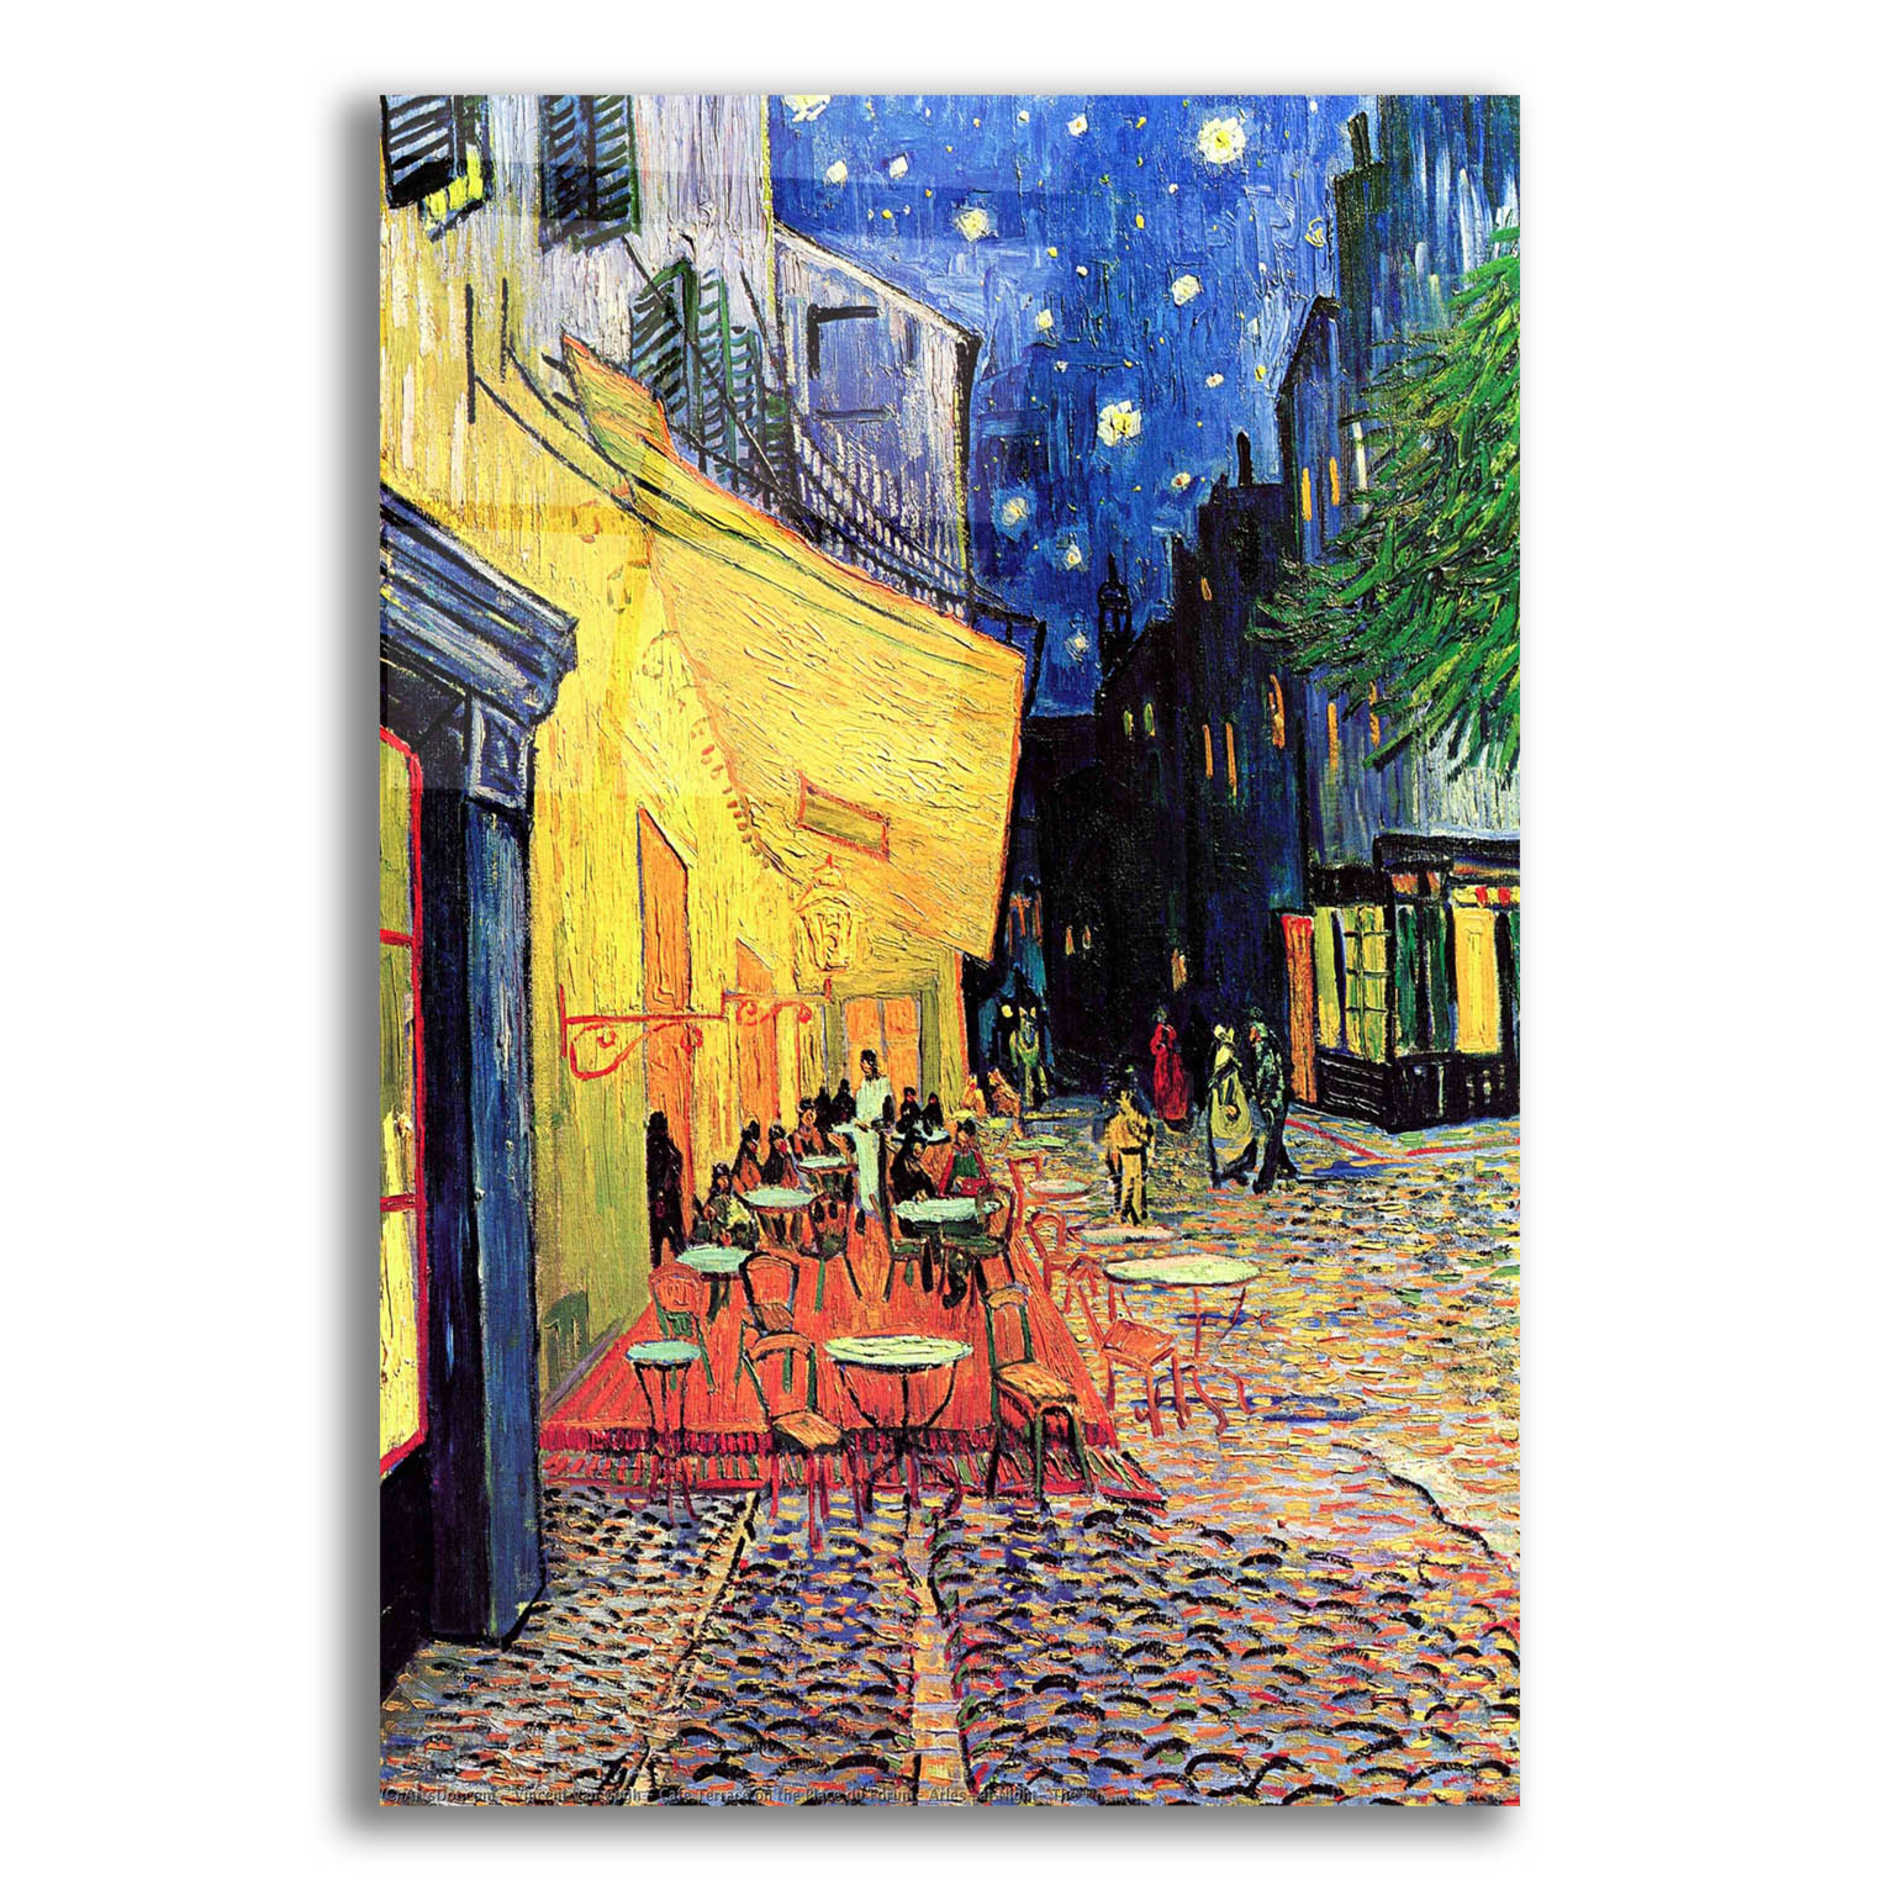 Epic Art 'Cafe Terrace at Night' by Vincent van Gogh, Acrylic Glass Wall Art,12x16x1.1x0,20x24x1.1x0,26x30x1.74x0,40x54x1.74x0